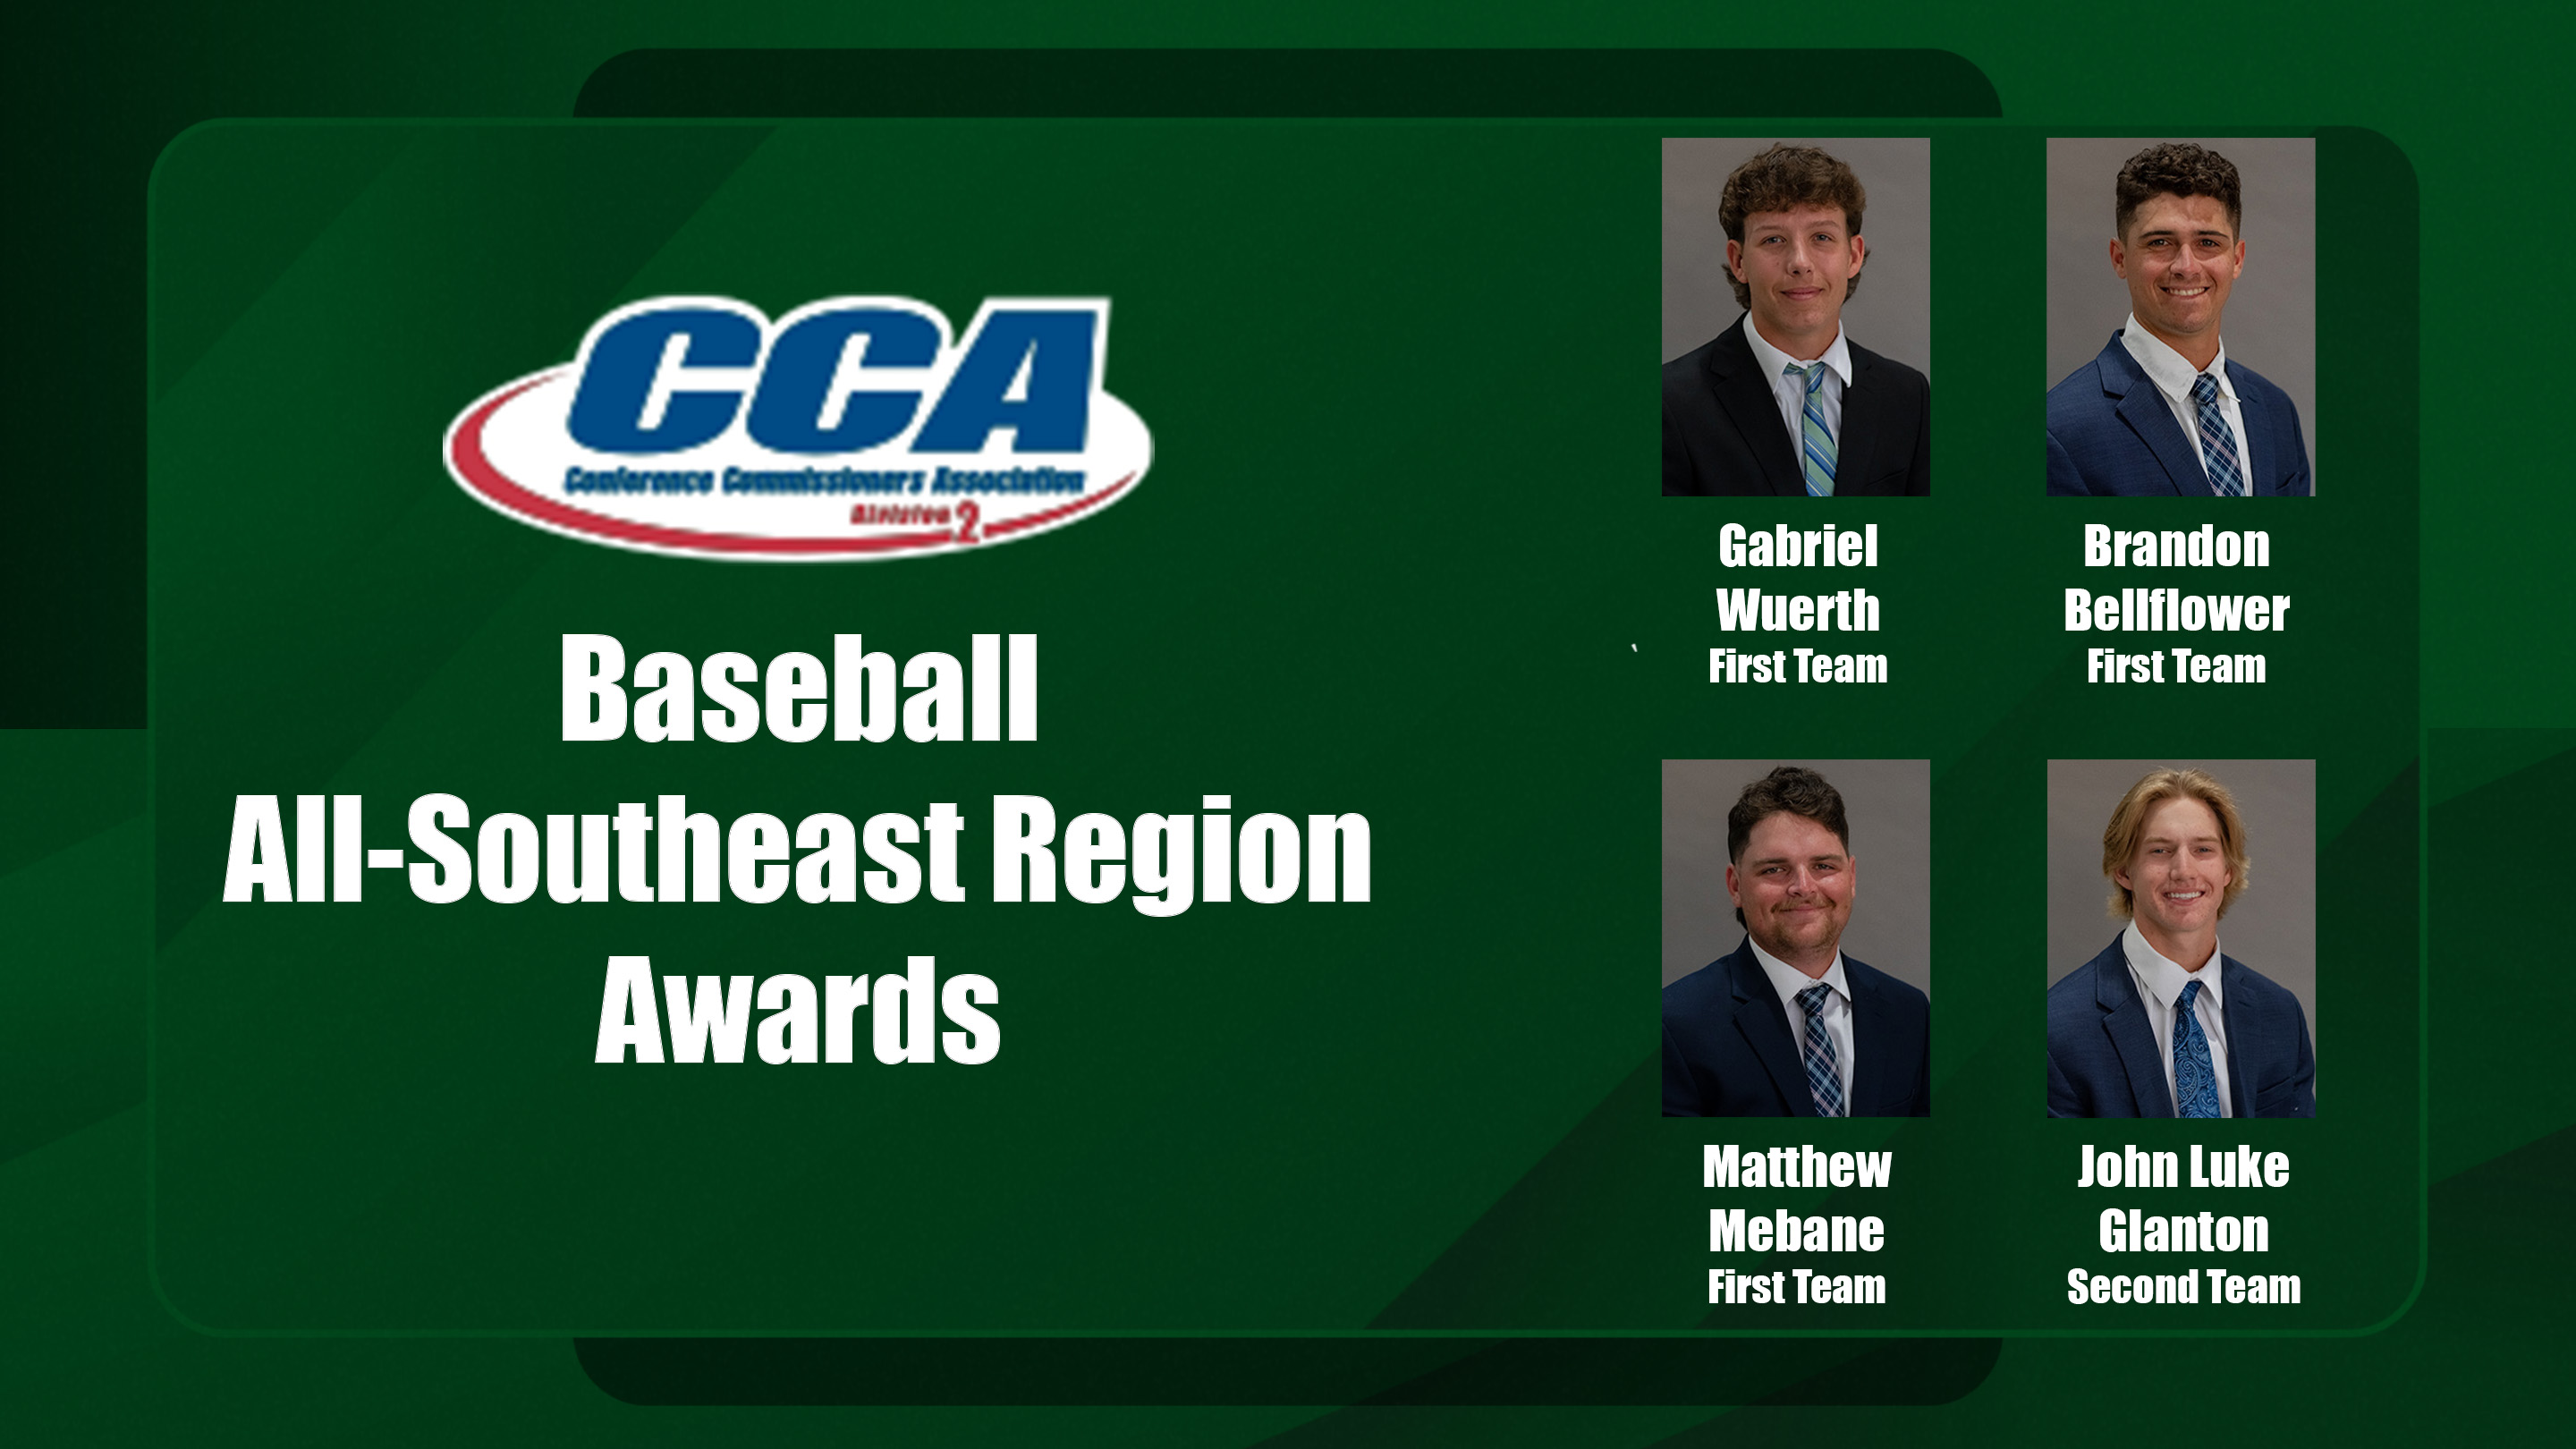 Four Bobcats named to D2CCA All-Region Teams